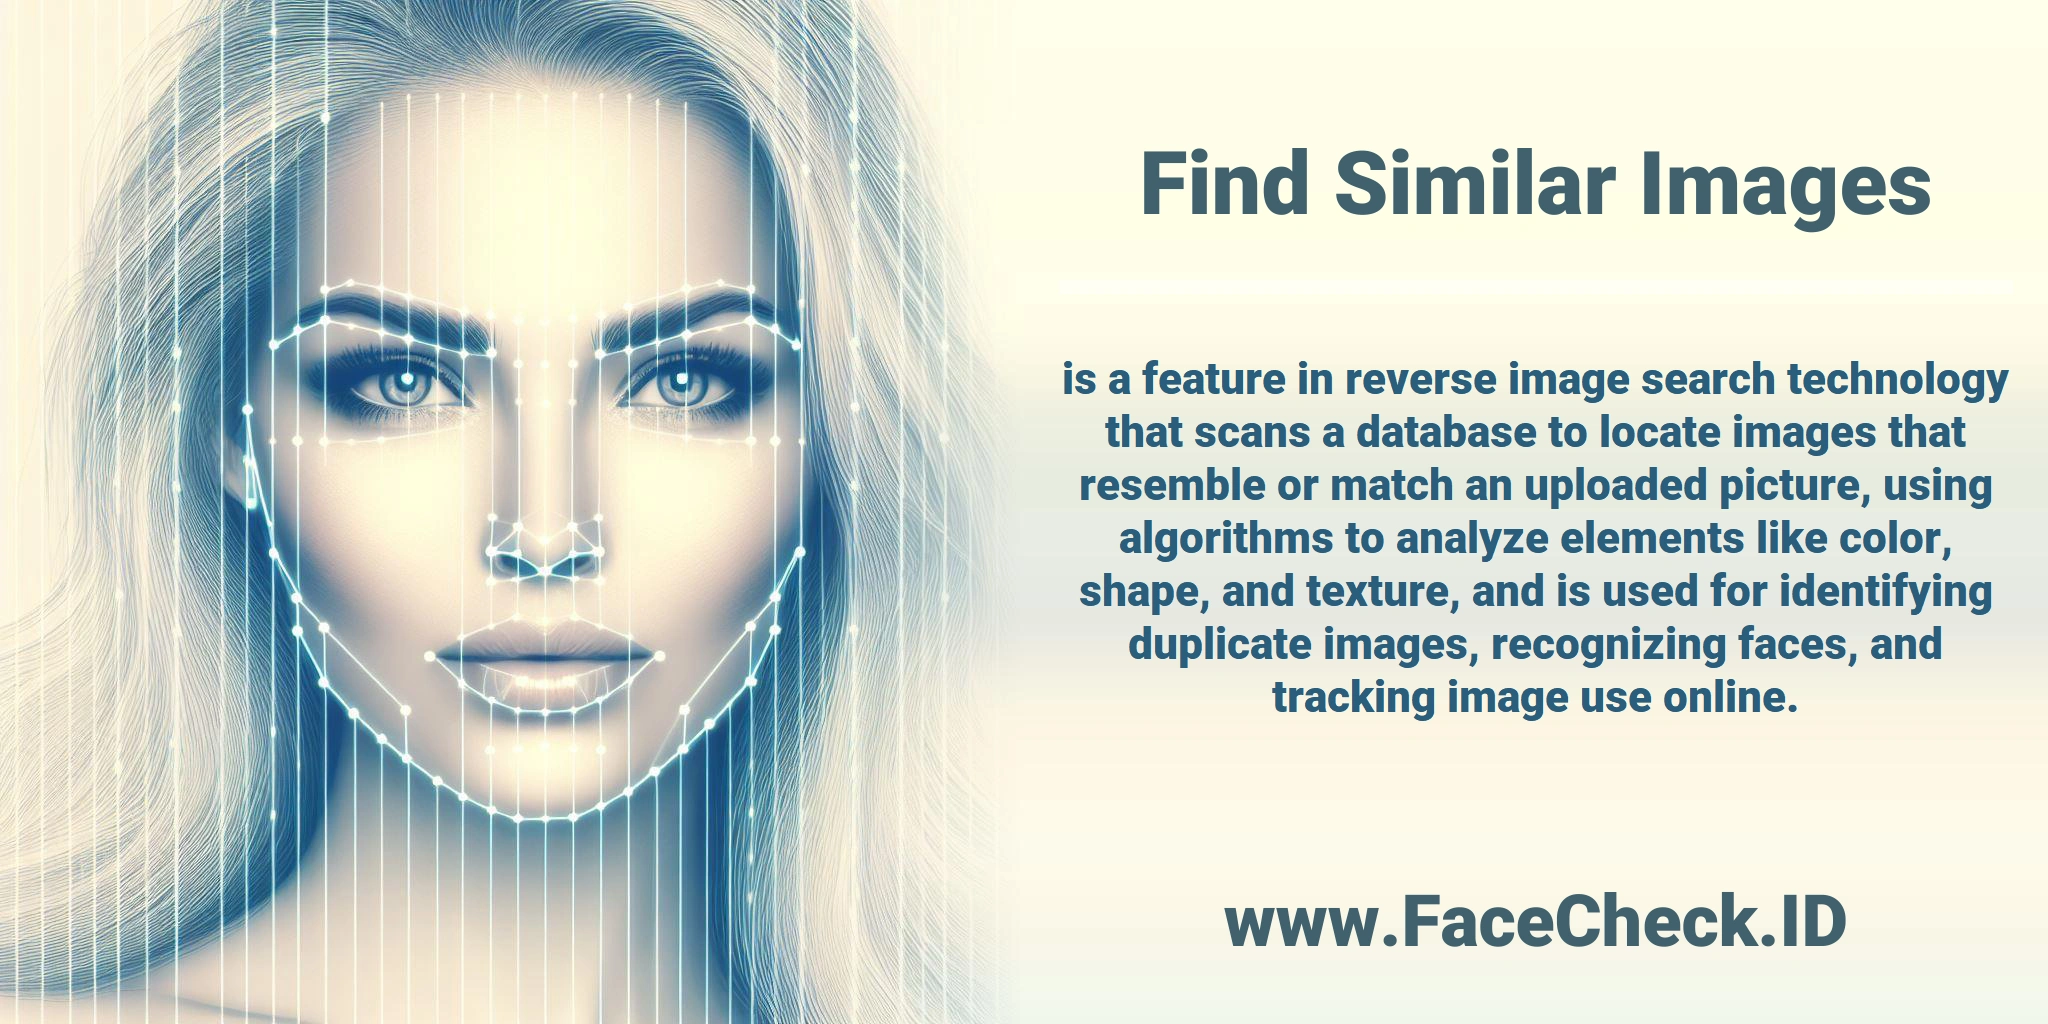 <b>Find Similar Images</b> is a feature in reverse image search technology that scans a database to locate images that resemble or match an uploaded picture, using algorithms to analyze elements like color, shape, and texture, and is used for identifying duplicate images, recognizing faces, and tracking image use online.